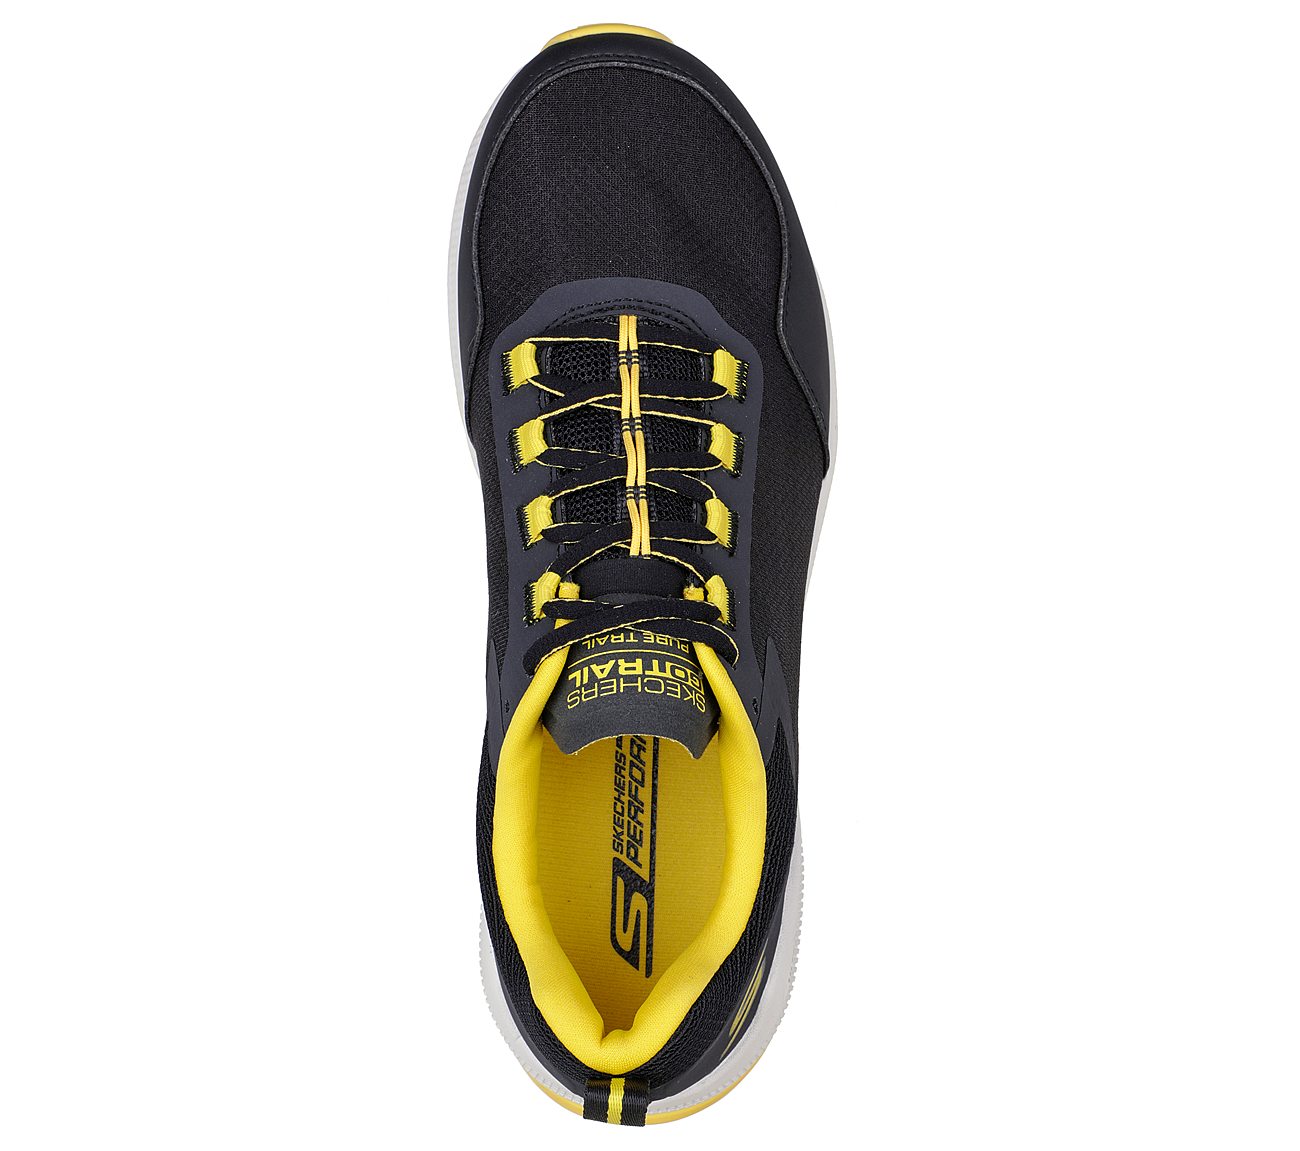 PURE TRAIL, BLACK/YELLOW Footwear Top View